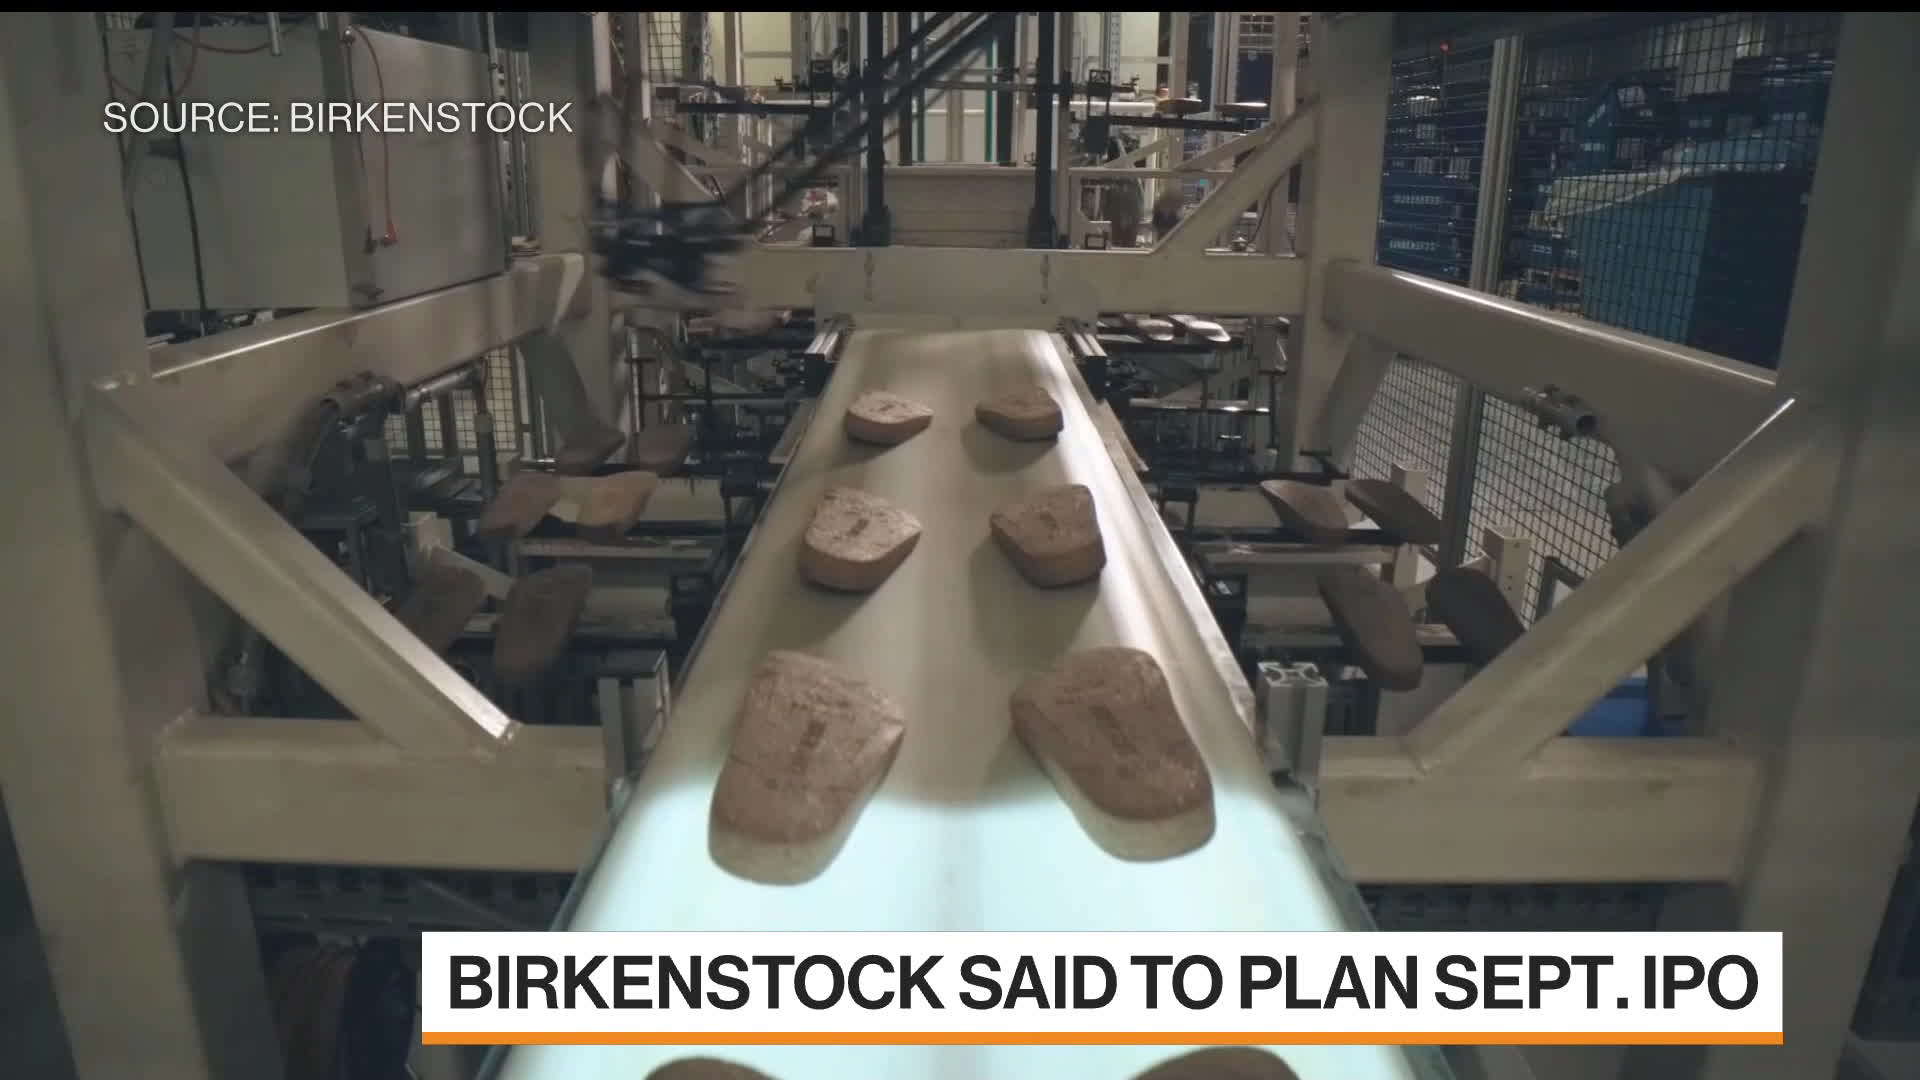 Birkenstock aims to raise up to $1.58 billion in US IPO